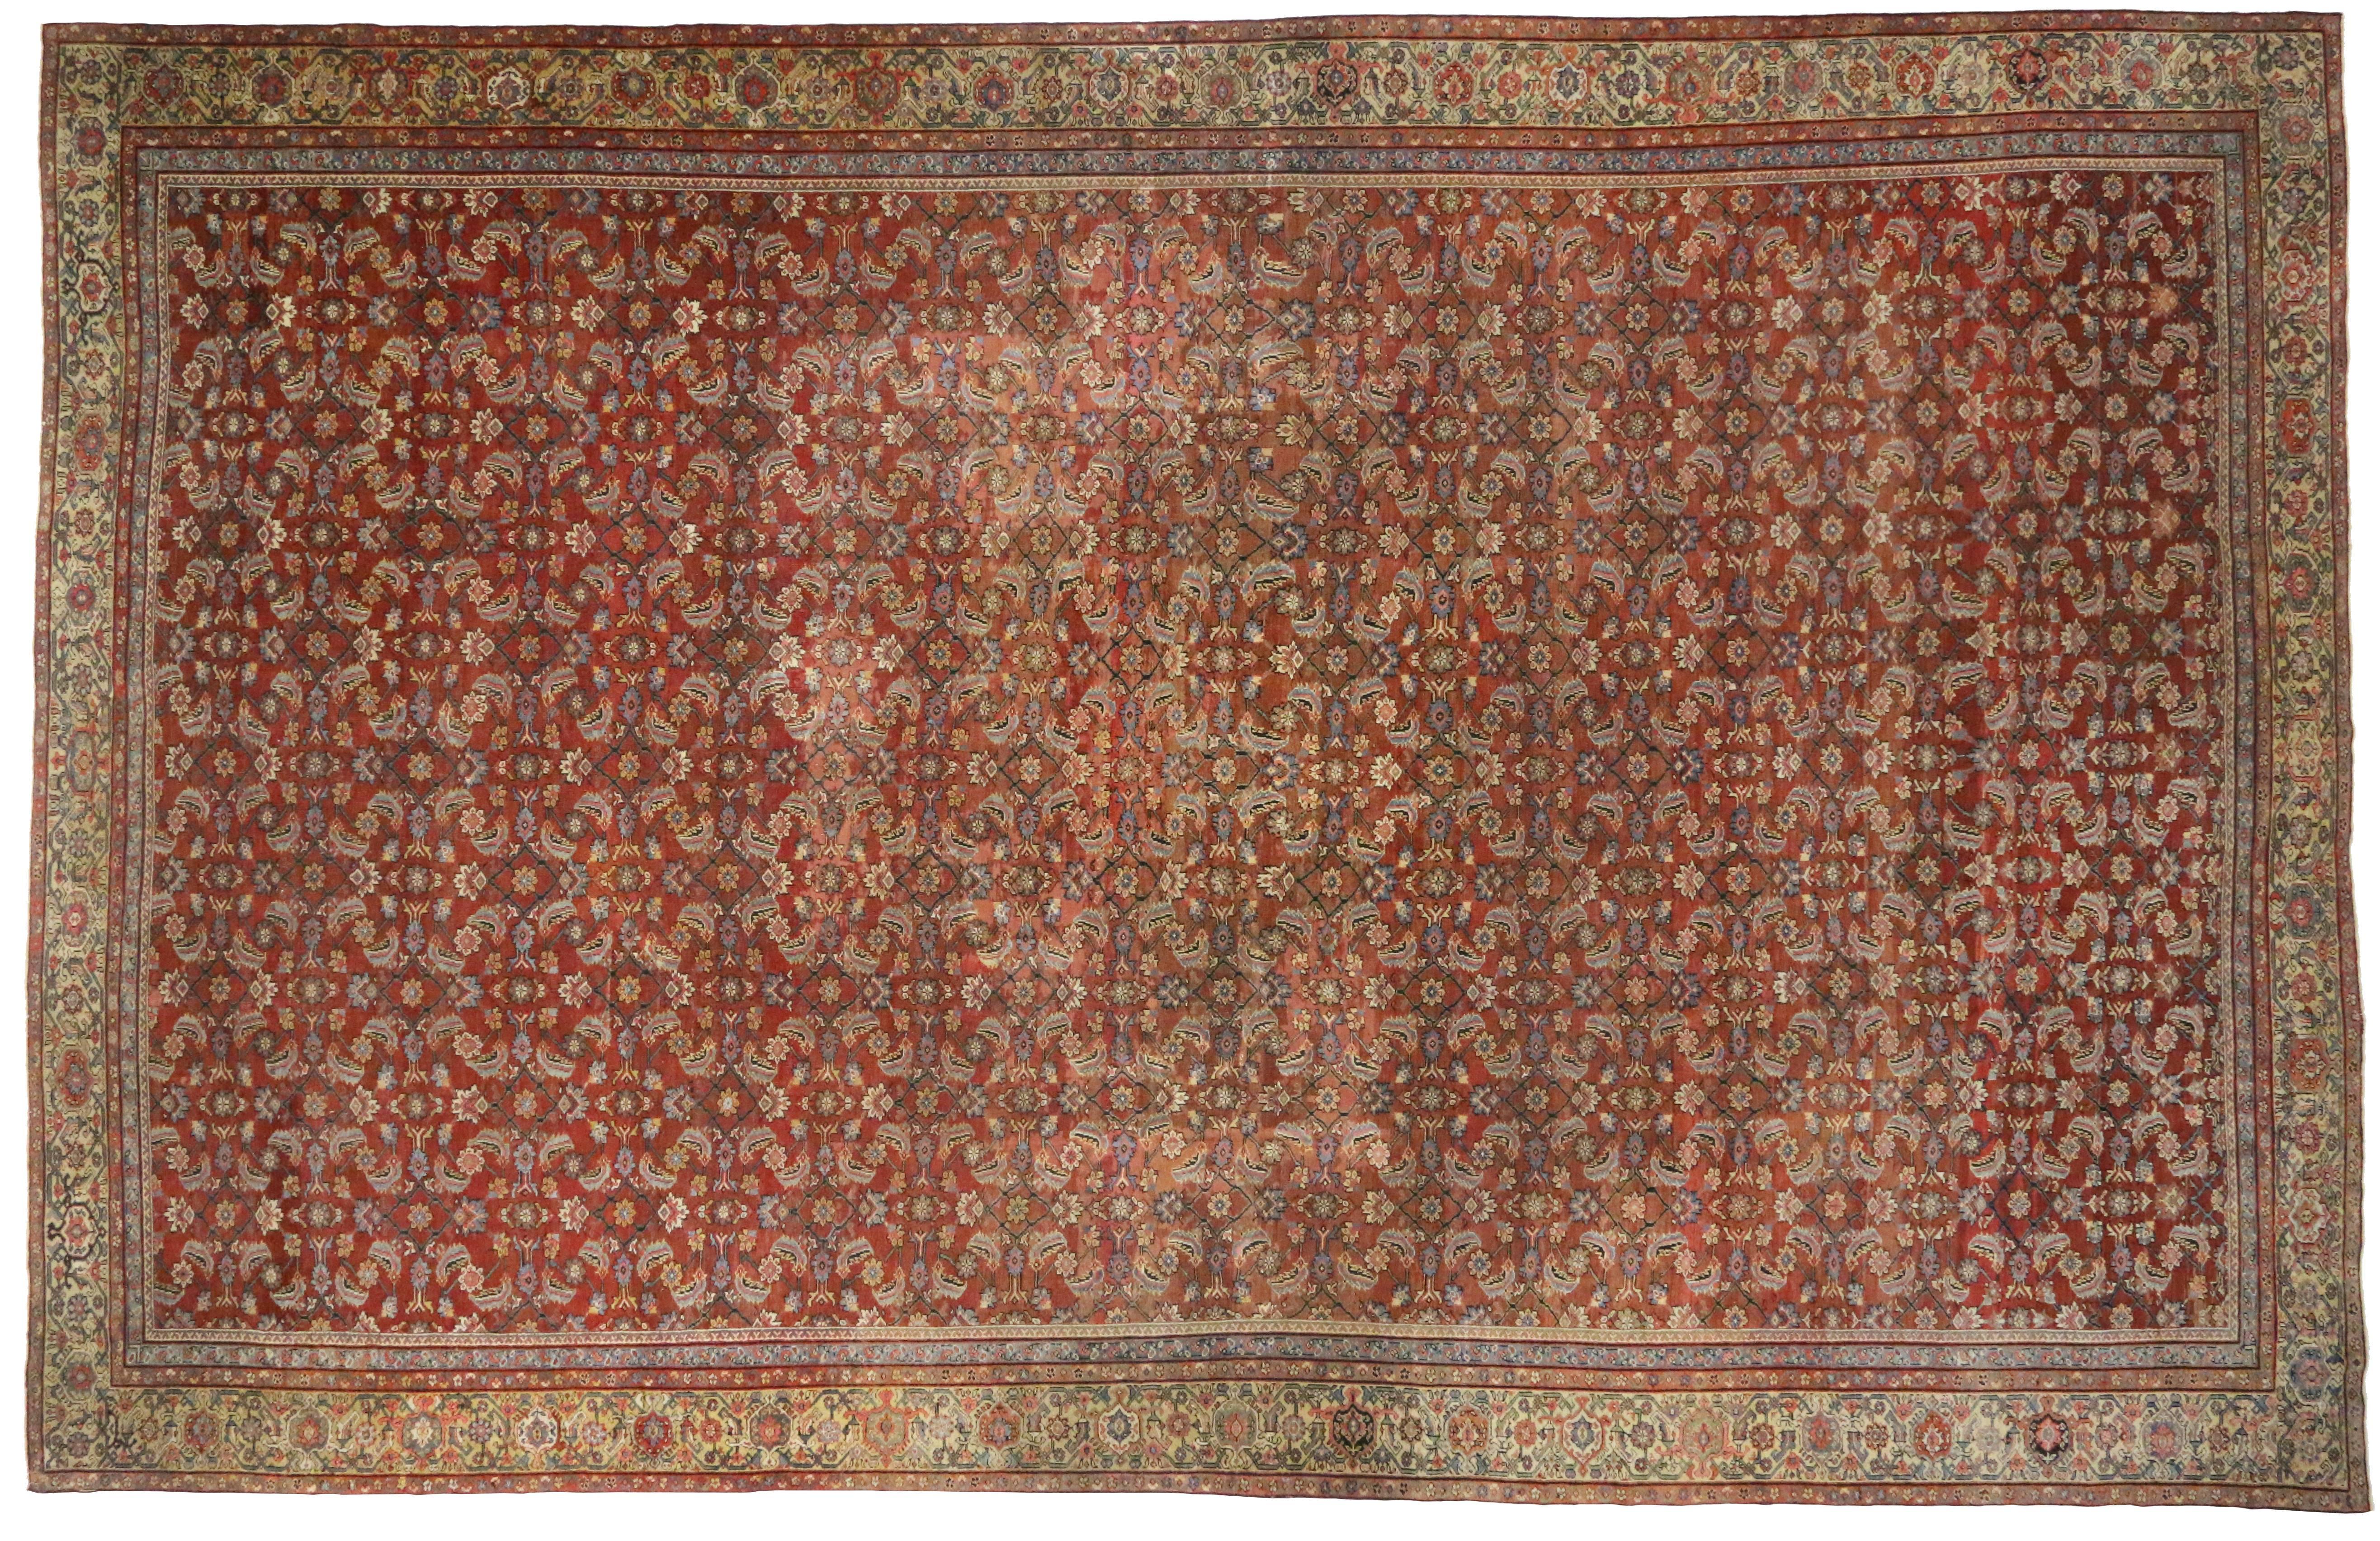 19th Century 1880s Oversized Antique Persian Farahan Rug, Hotel Lobby Size Carpet For Sale